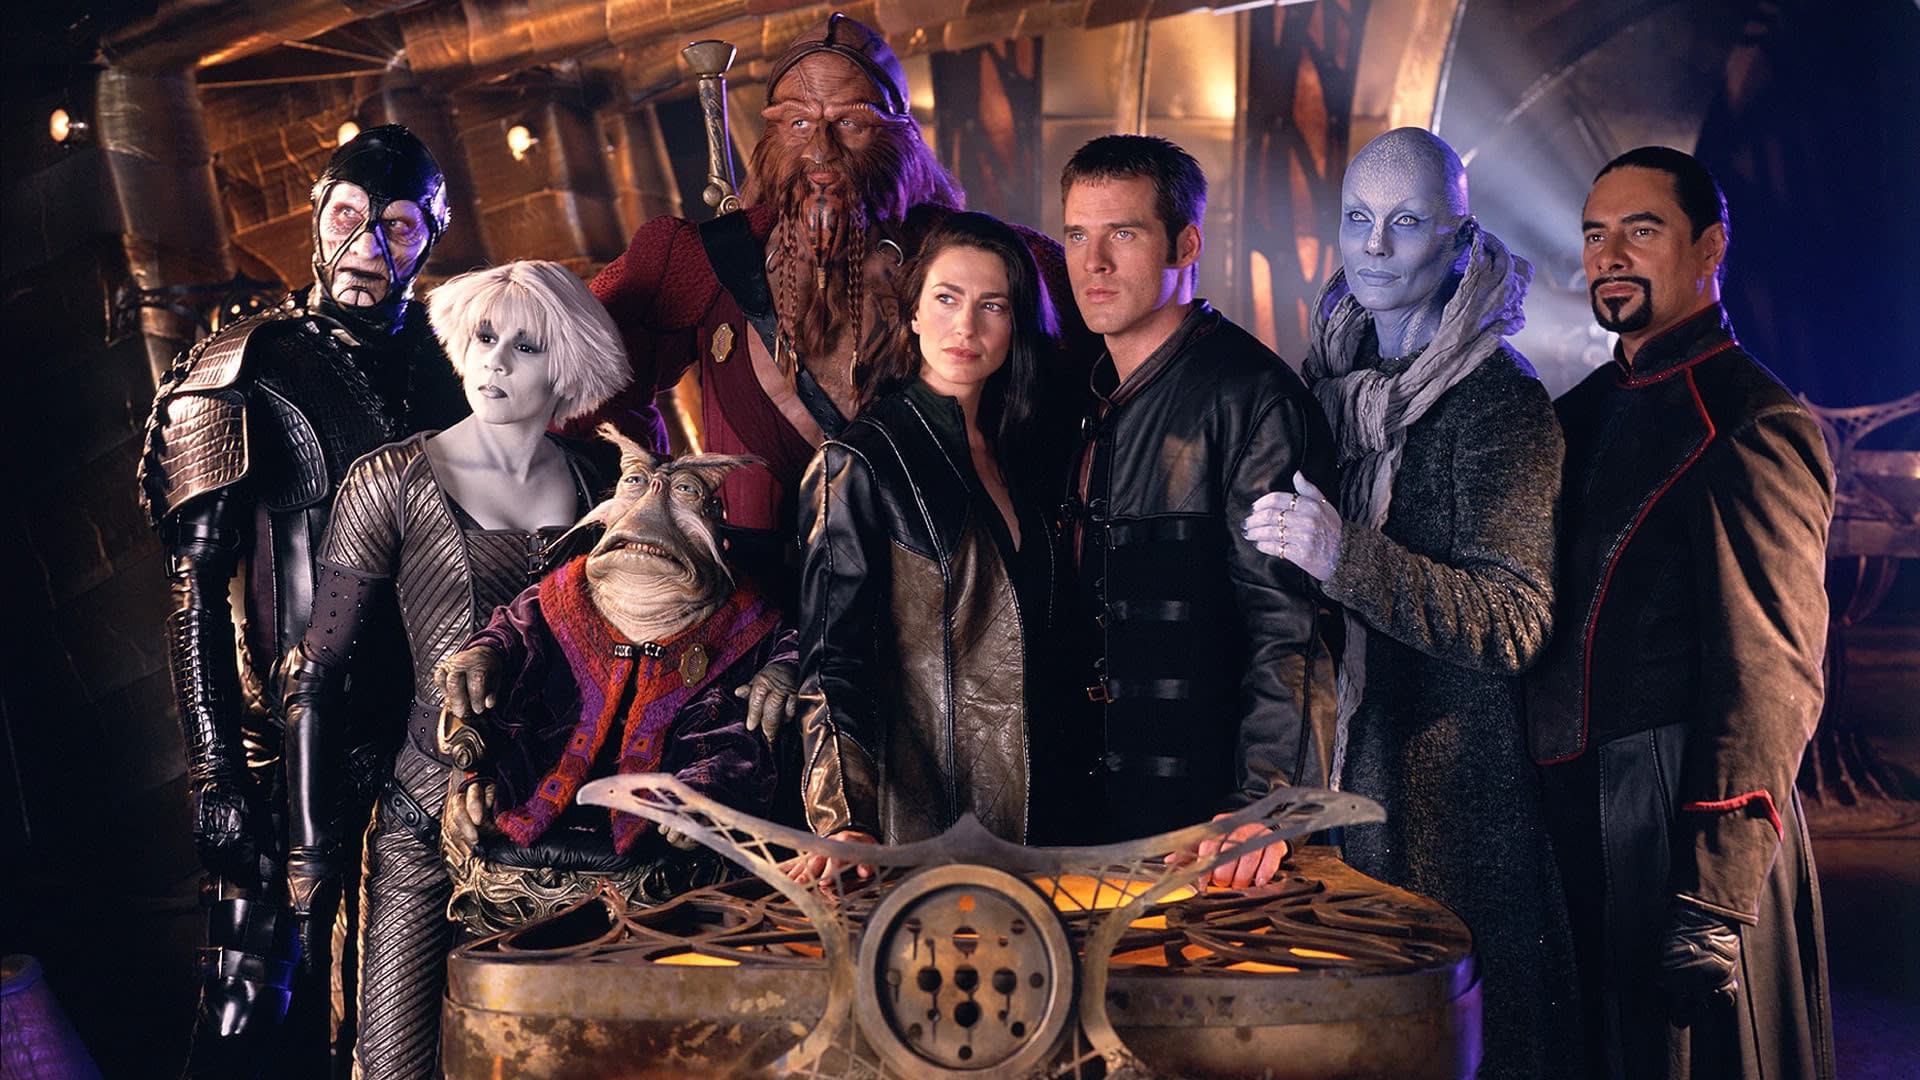 "Farscape": Director James Gunn On How Cult Fav Sci-Fi Series Was Major "Guardians of the Galaxy" Influence